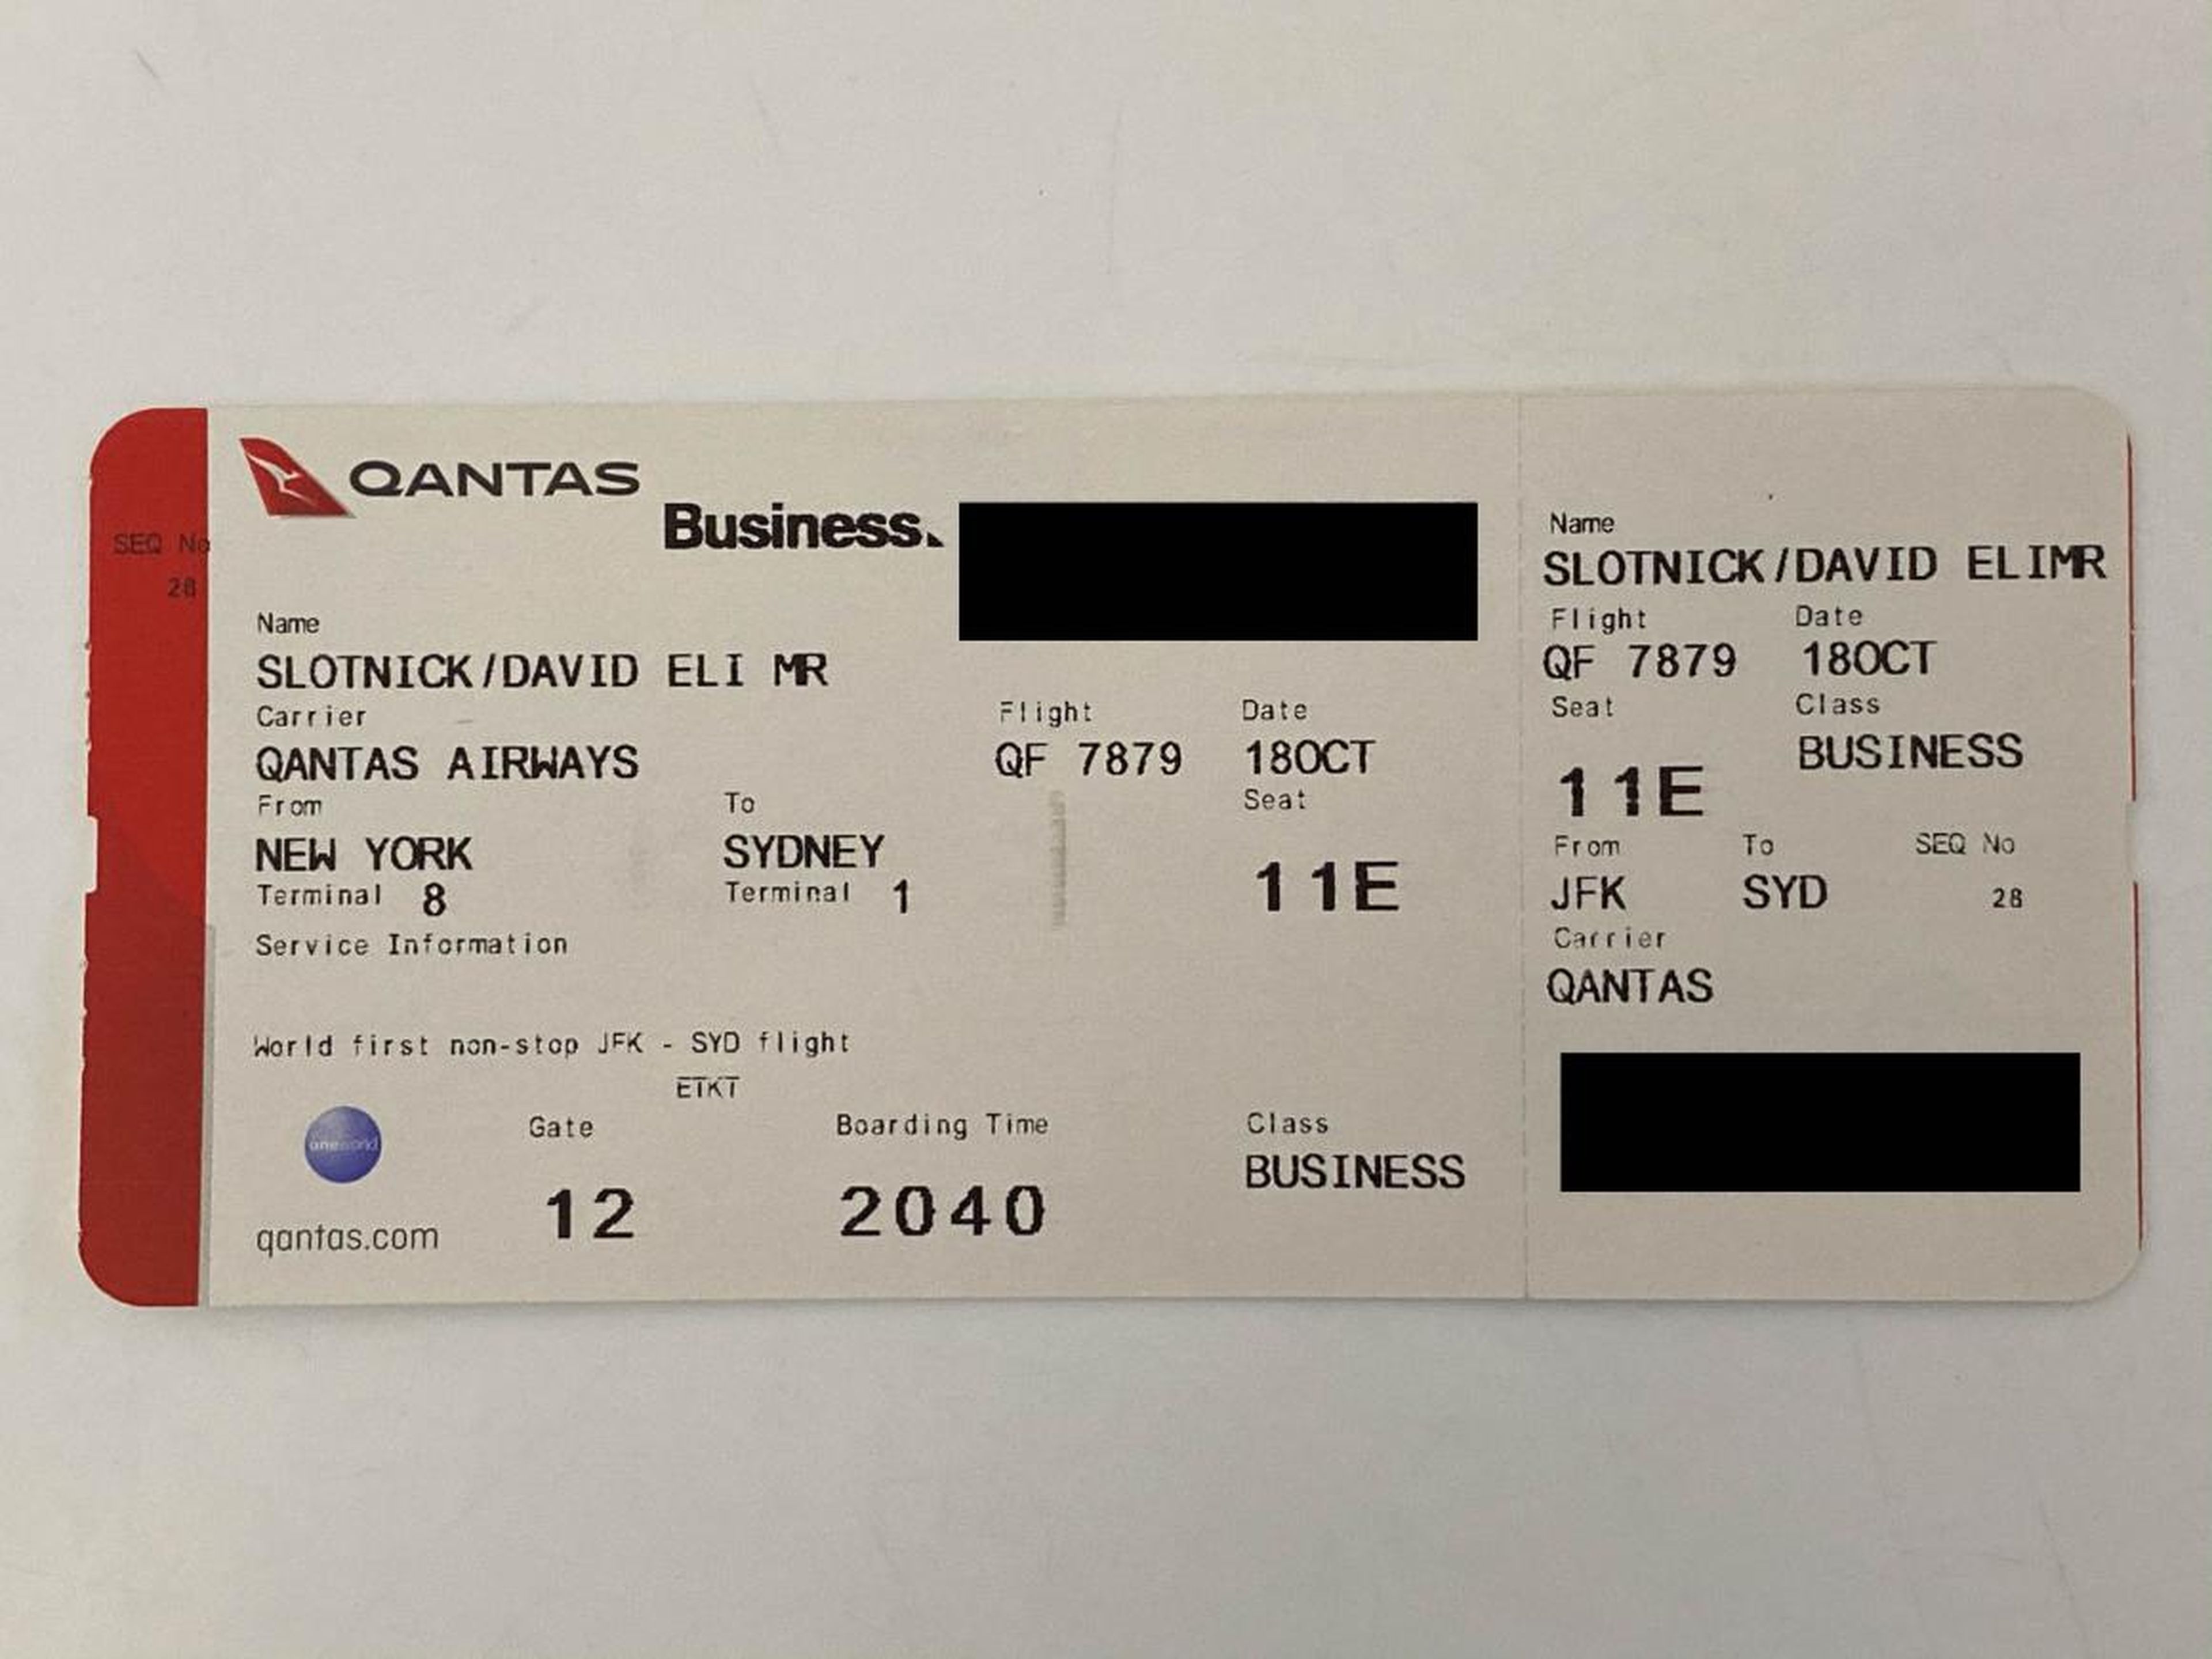 There was also a special touch on the boarding pass.